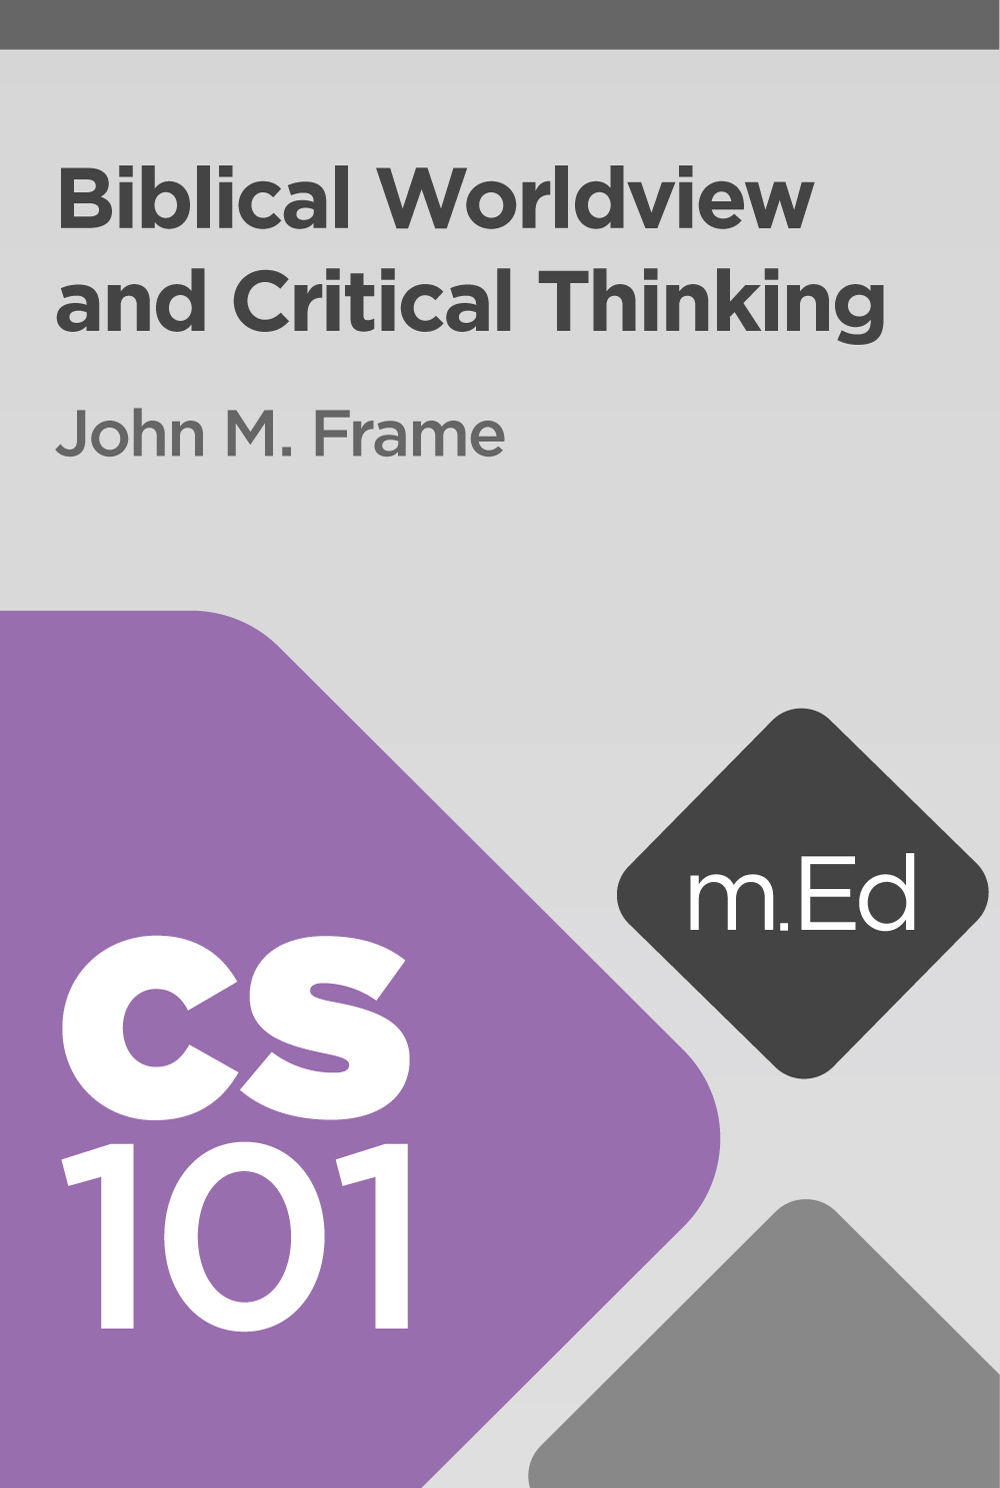 Mobile Ed: CS101 Biblical Worldview and Critical Thinking (4 hour course)